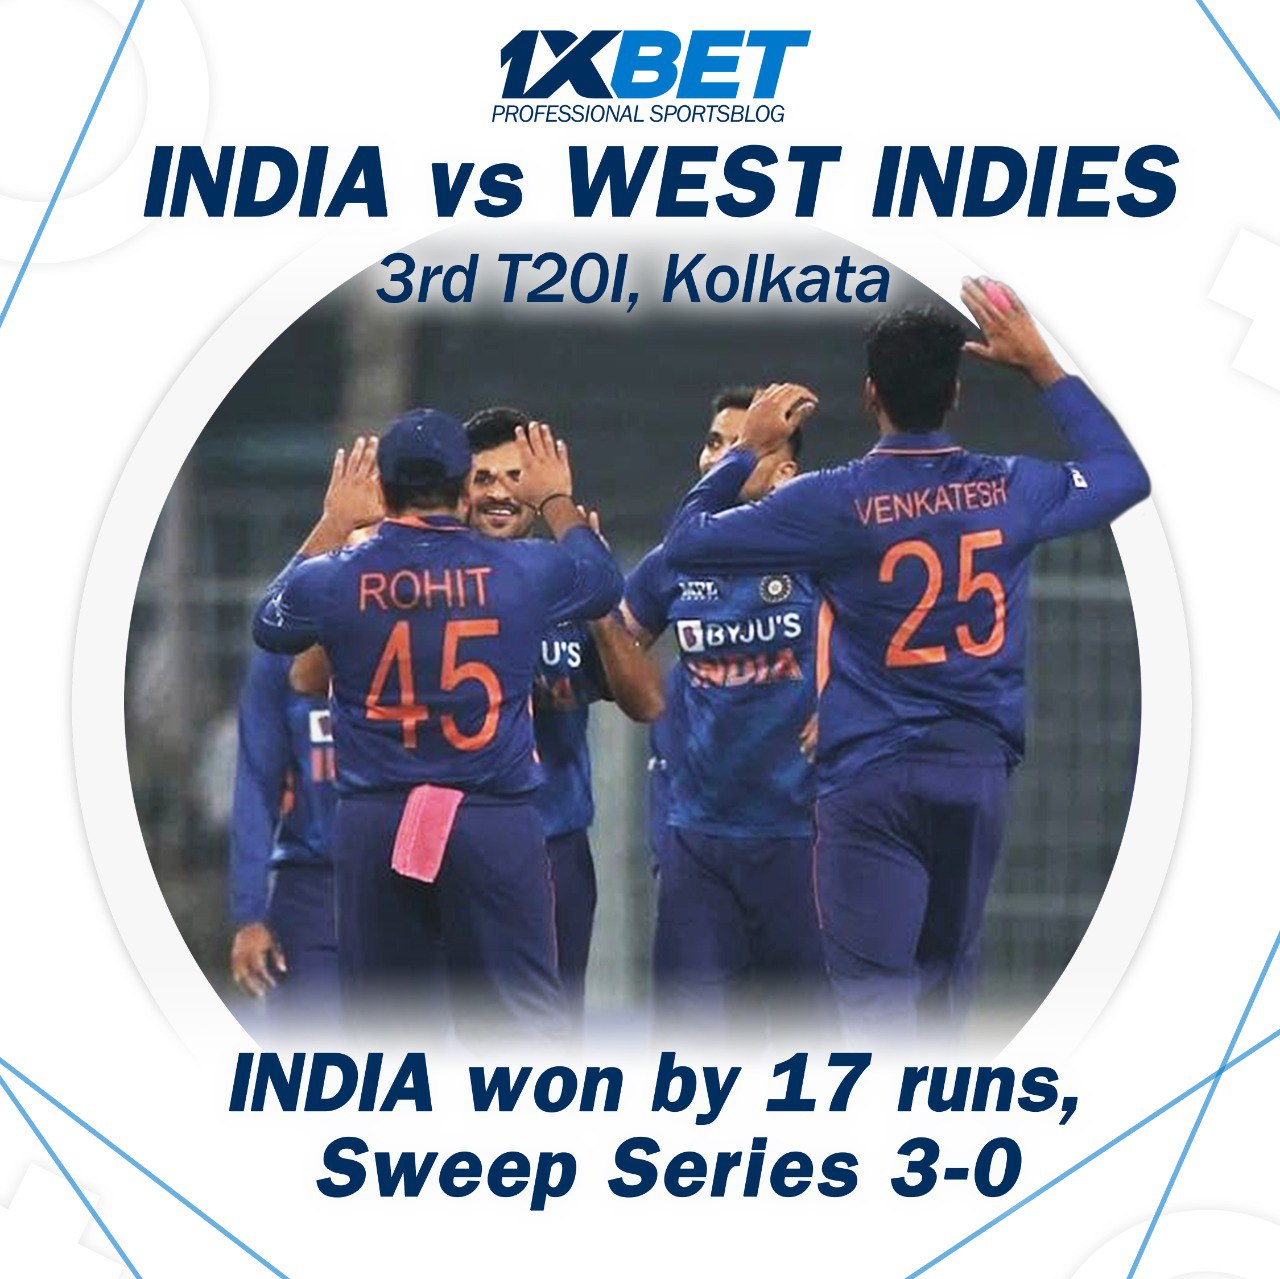 India vs West Indies, 3rd T20I: India won by 17 runs